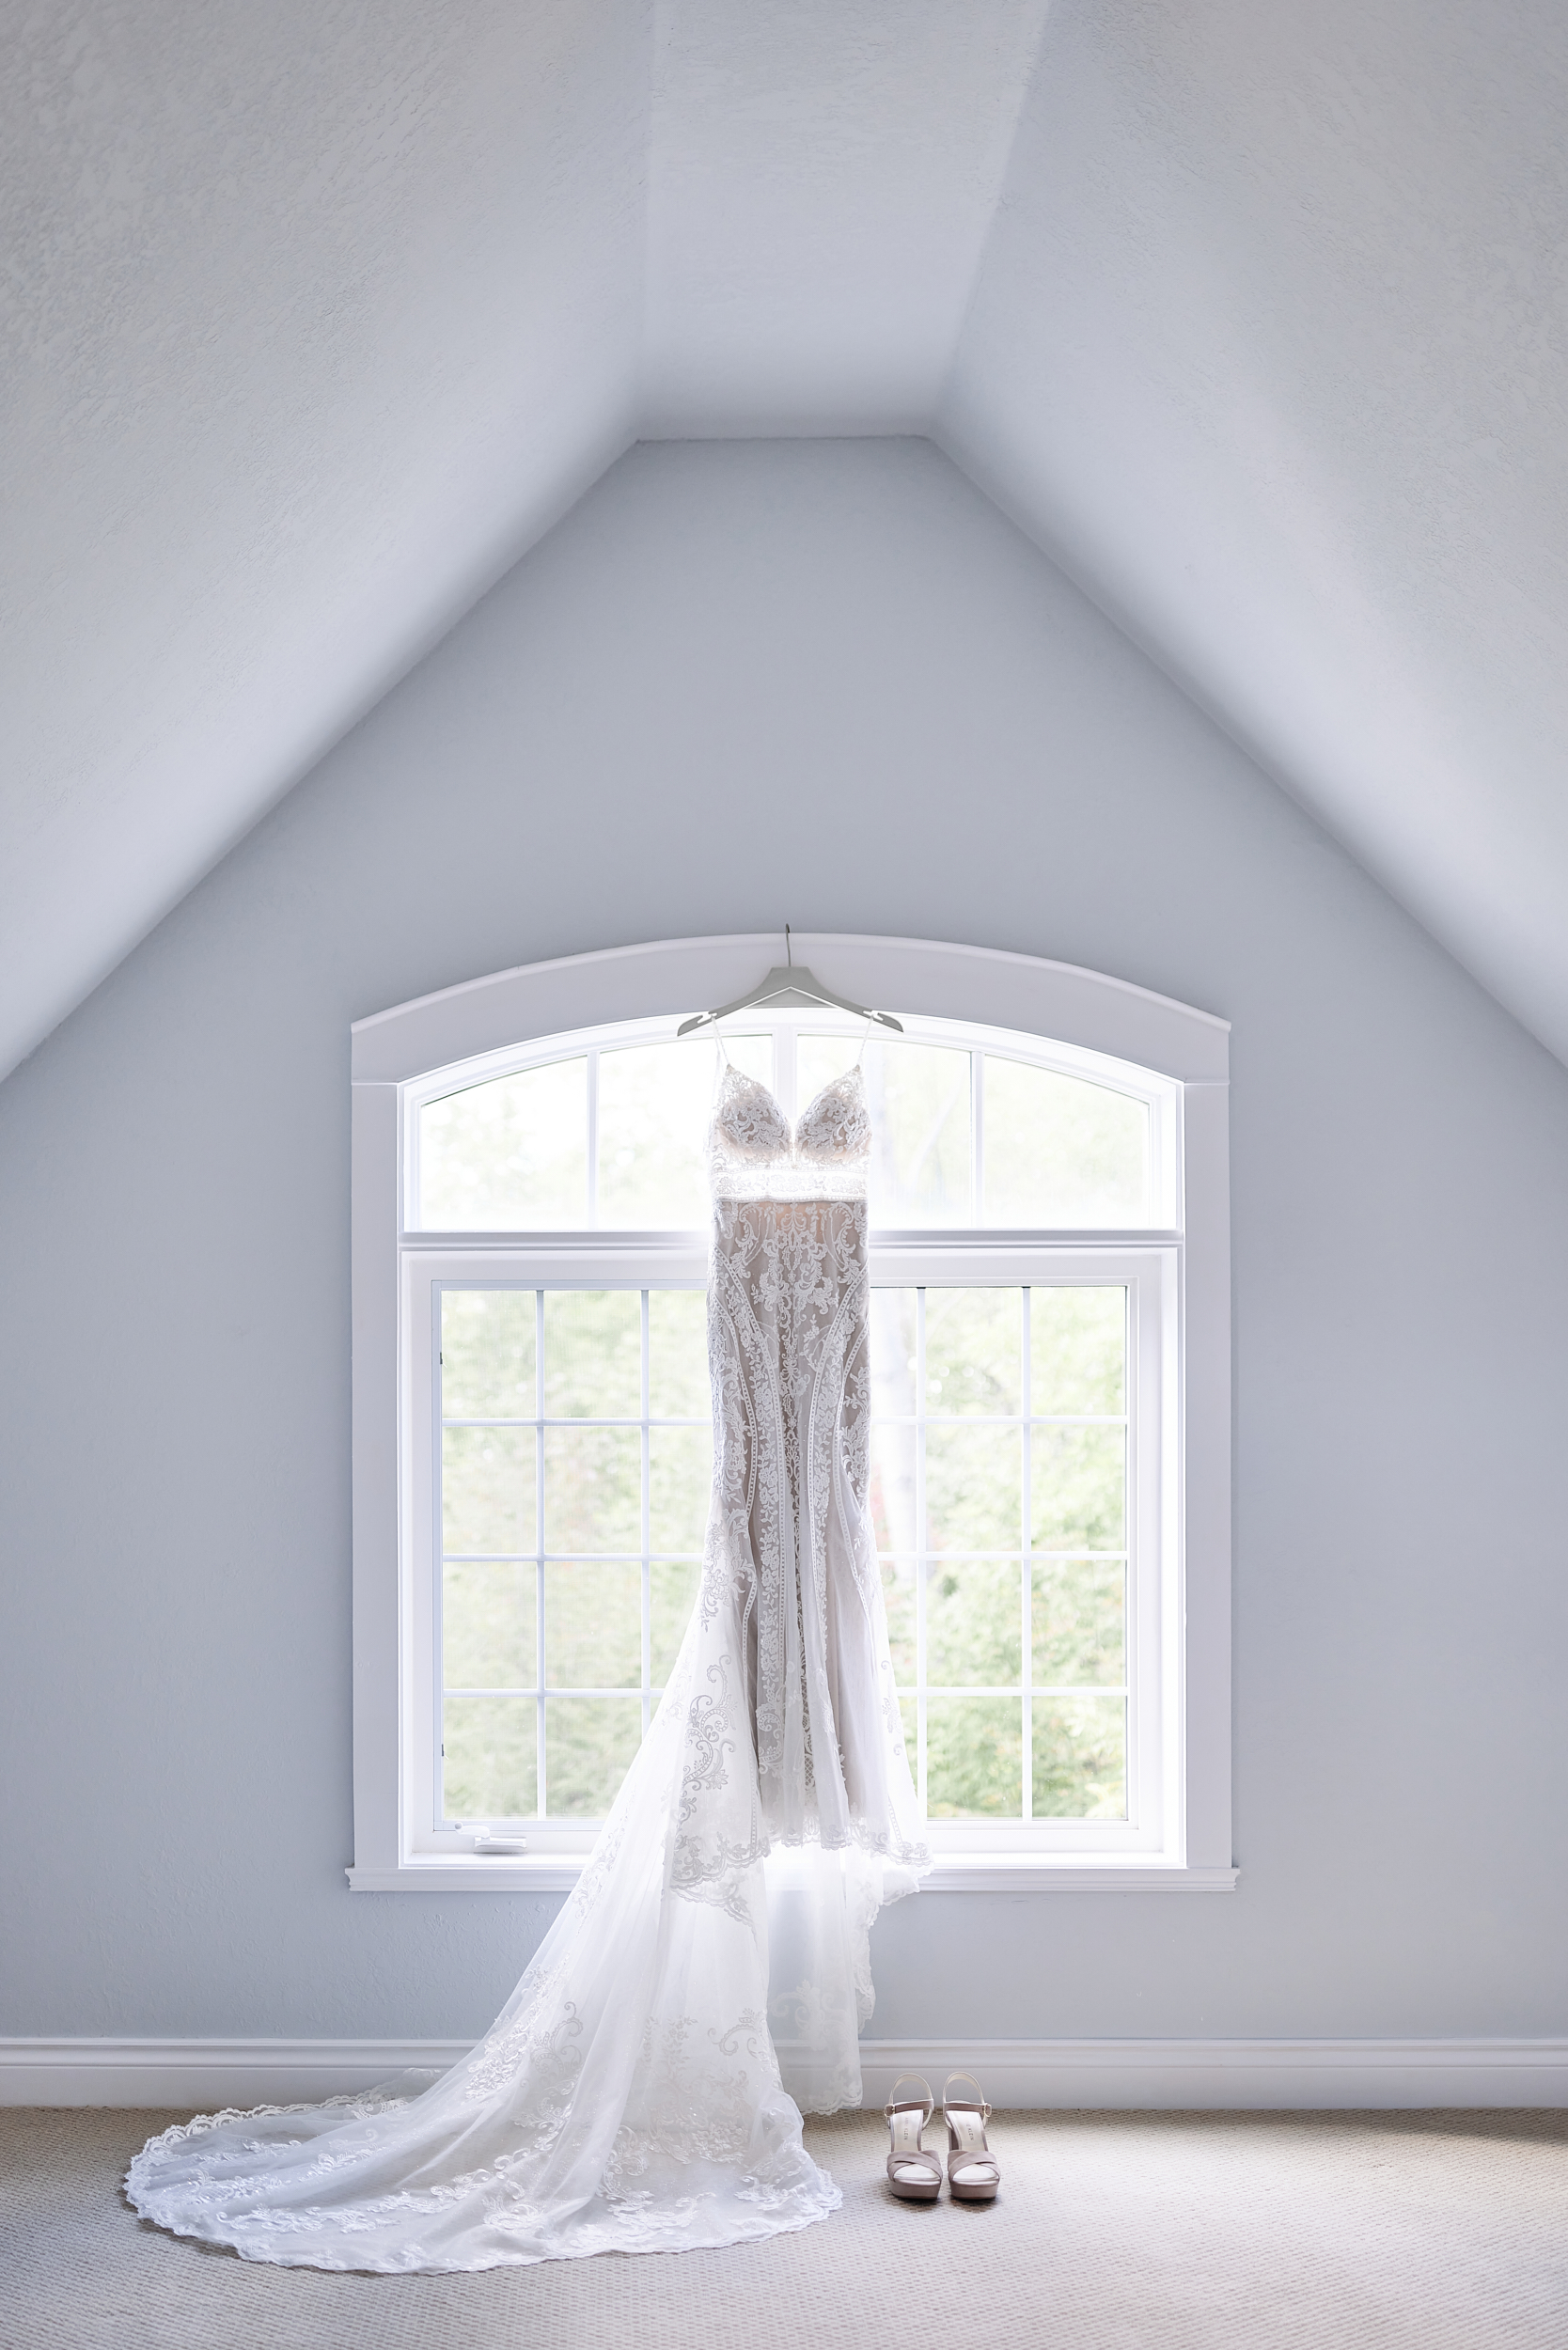 The Doctor's House Wedding Photography - Greco Photo Company